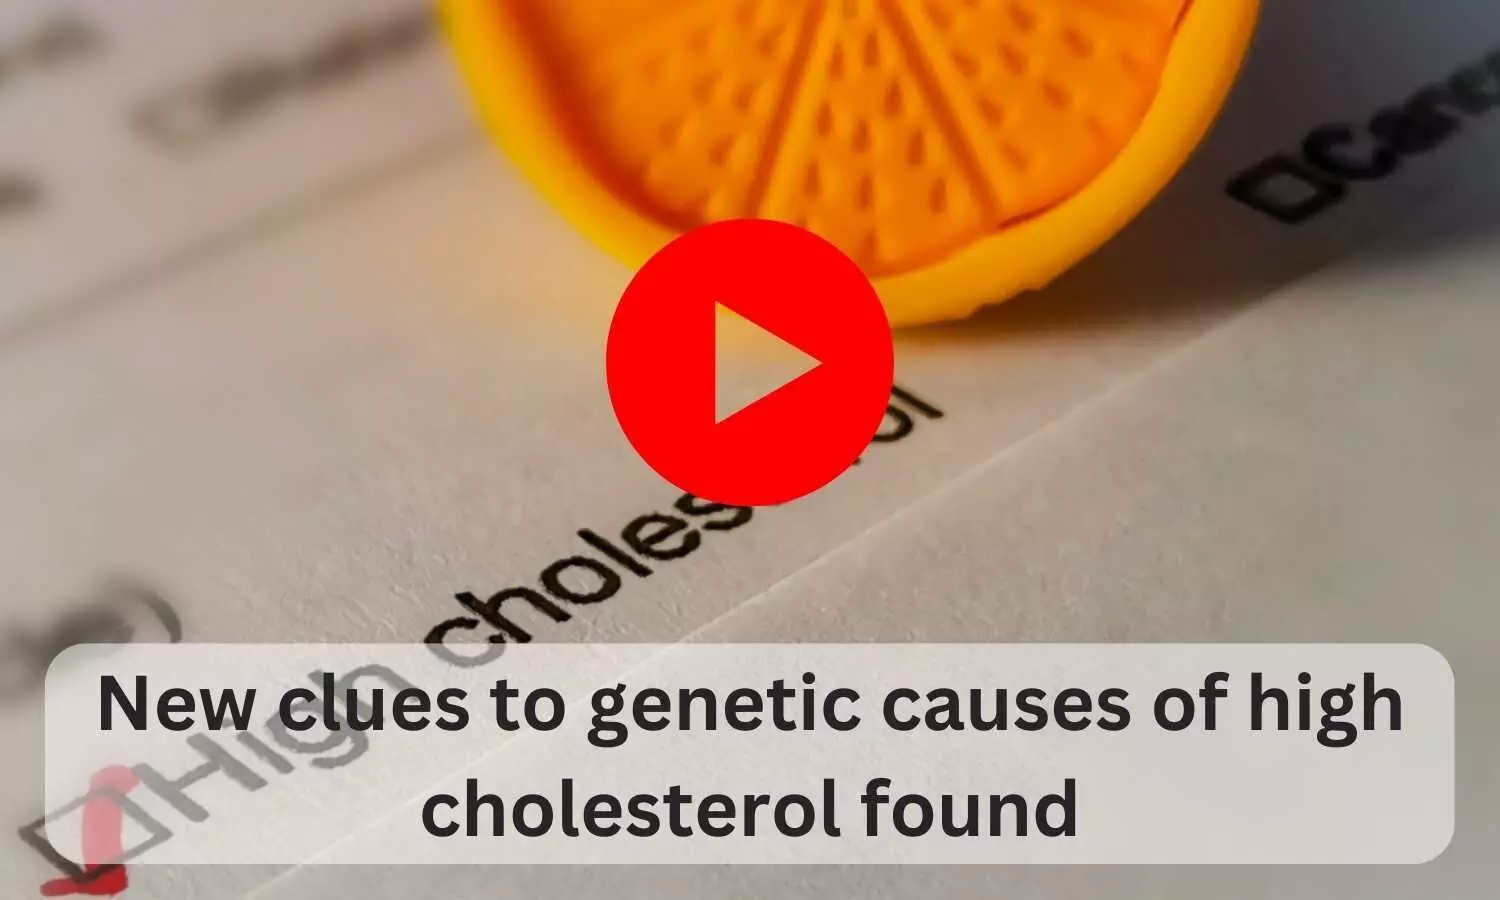 New clues to genetic causes of high cholesterol found